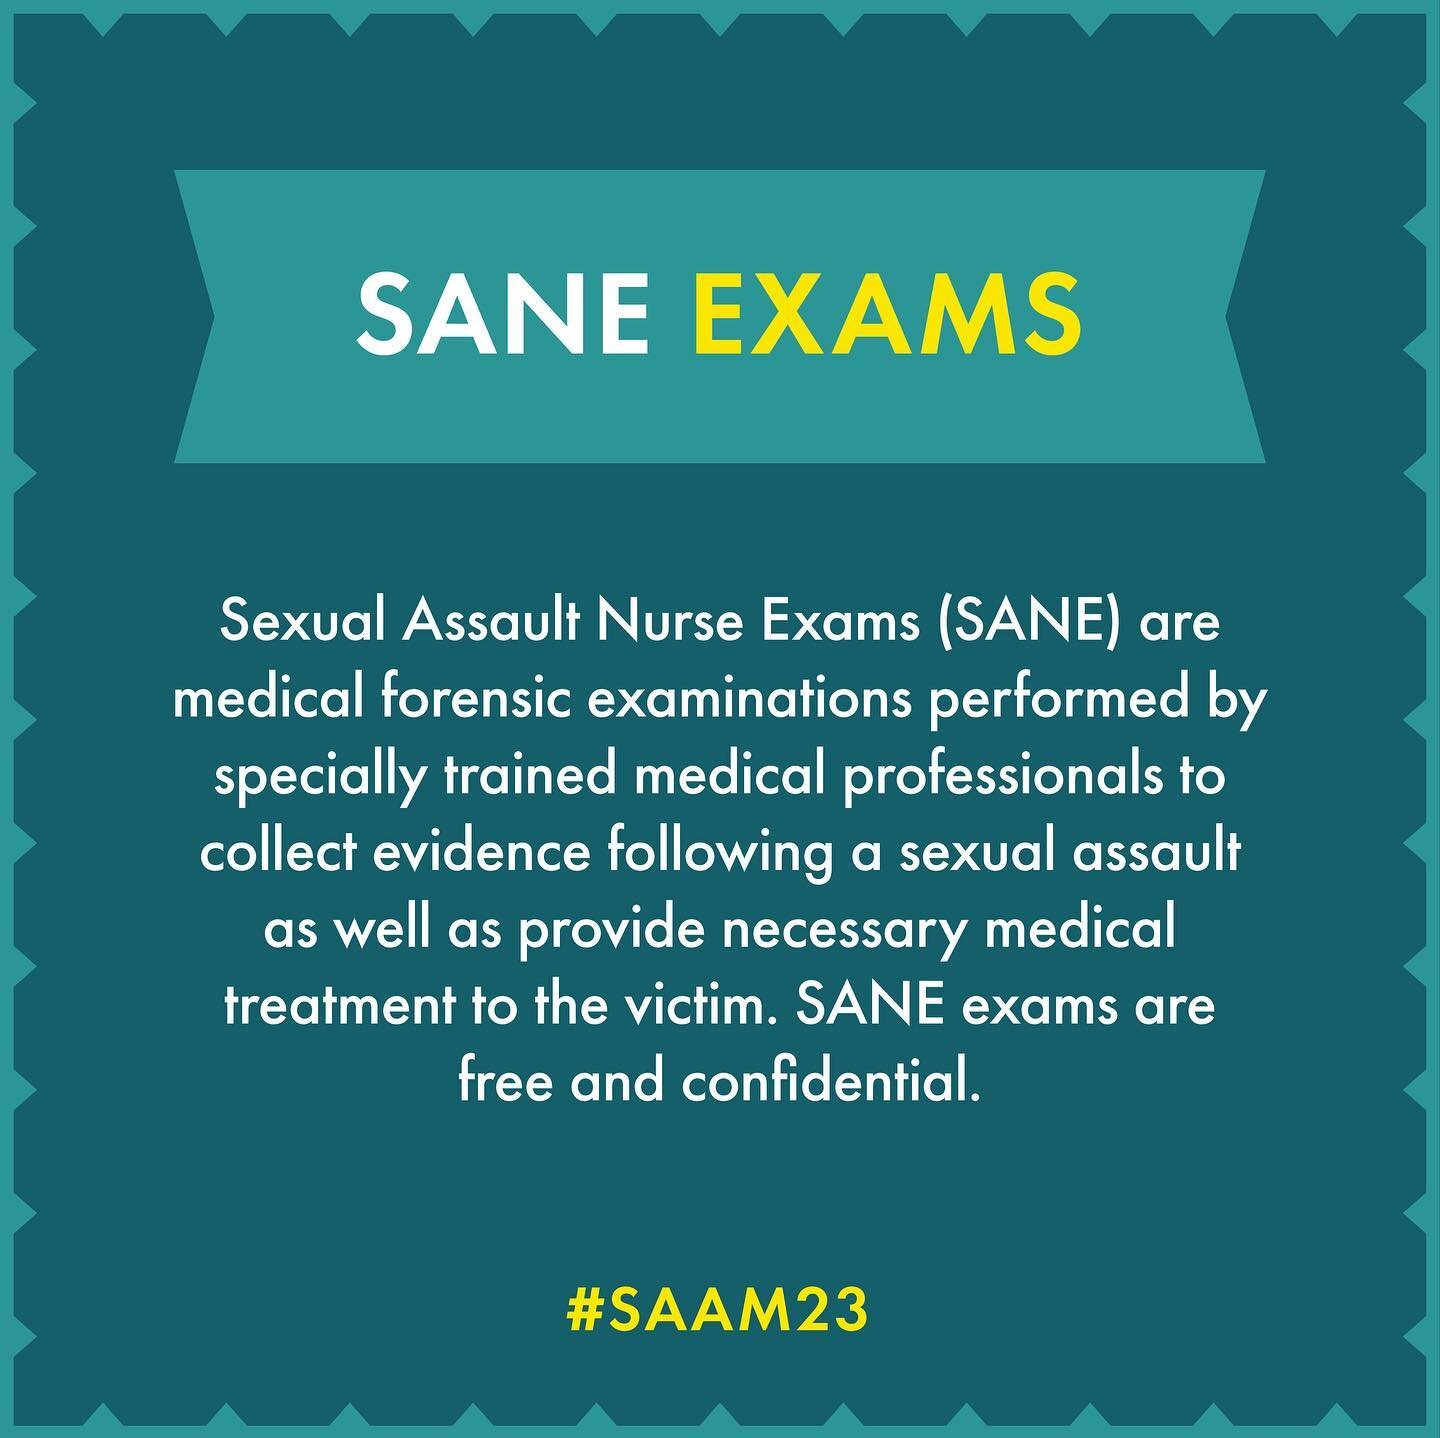 When a sexual assault occurs, a victim may want to get a Sexual Assault Nurse Examination (commonly referred to as a Rape Kit). These exams are critical to collecting potential DNA evidence connected to the crime to assist an investigation later on. 